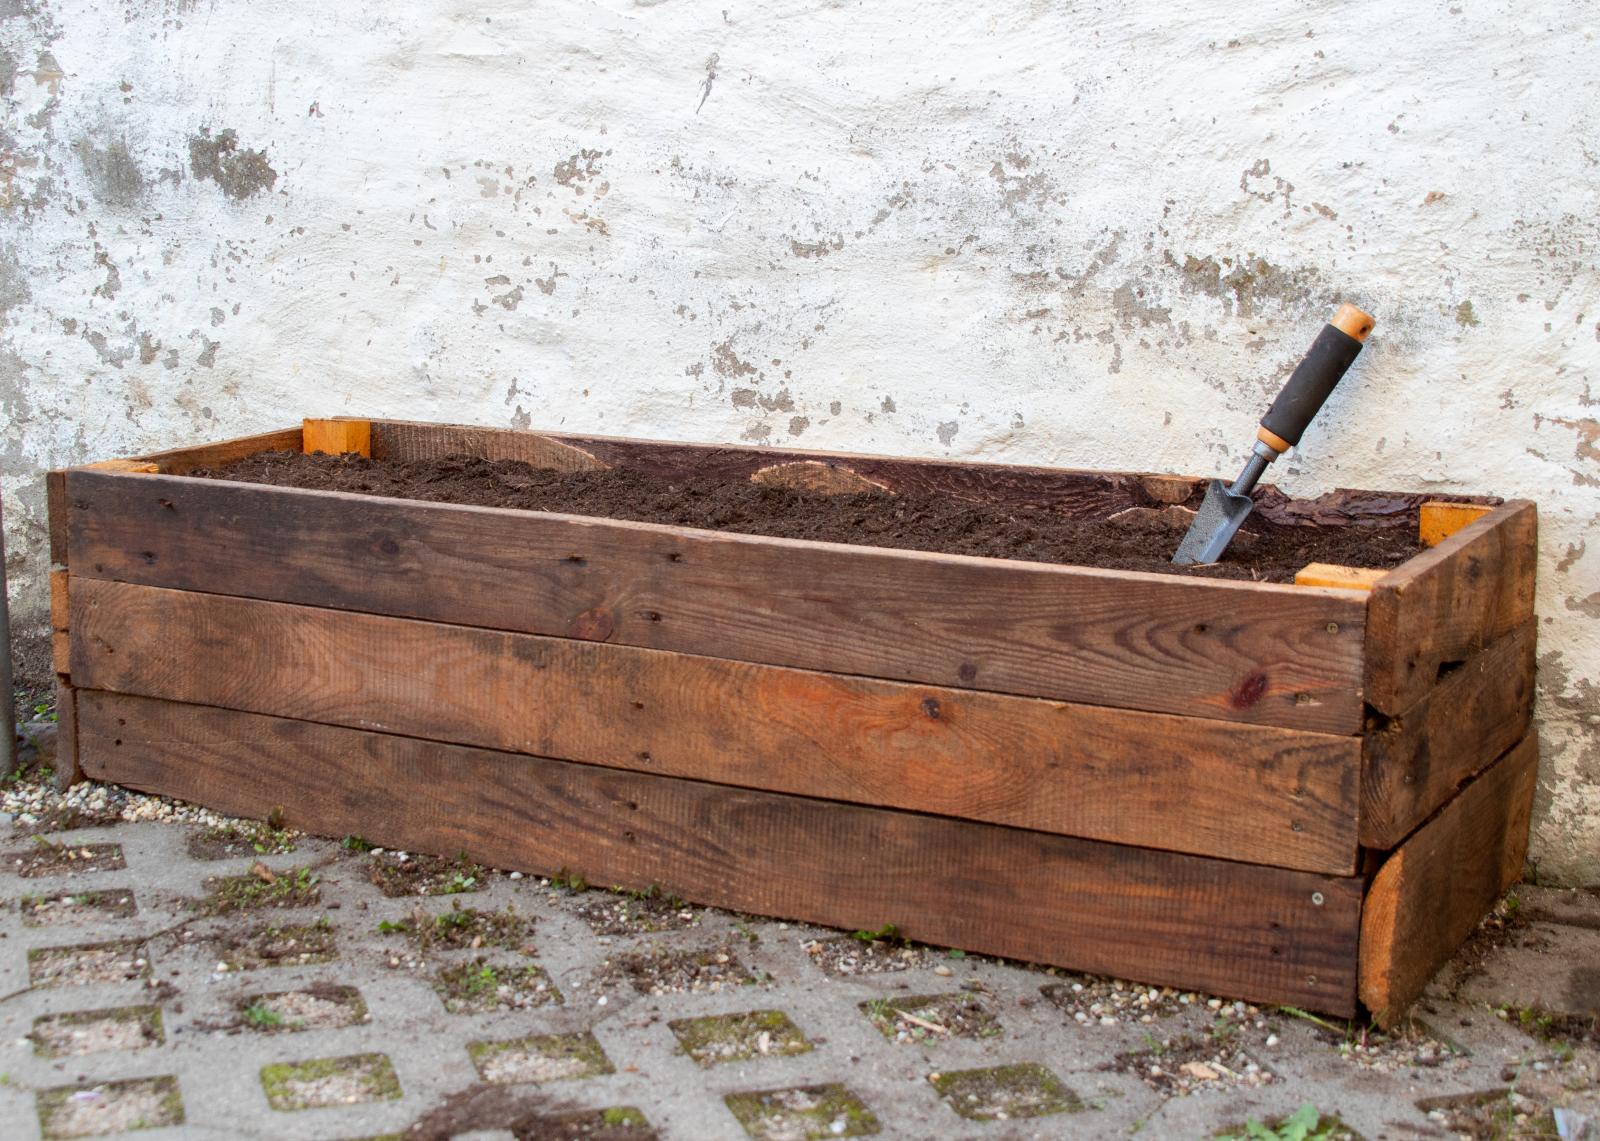 A wooden crate used as a planter